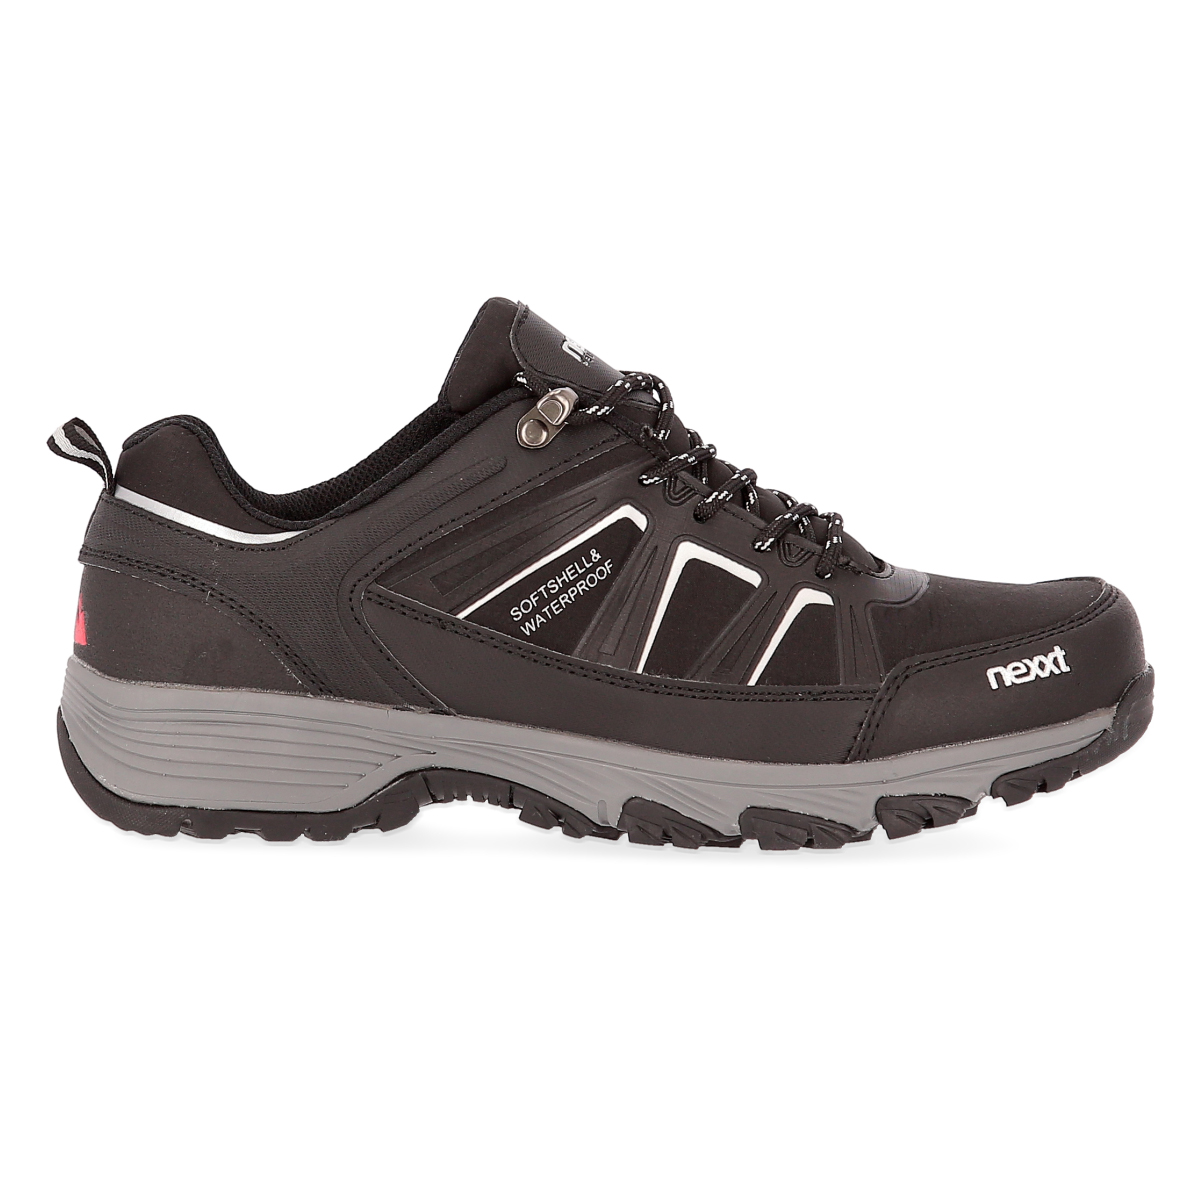 Zapatillas Outdoor Nexxt Shell Pro Hombre,  image number null